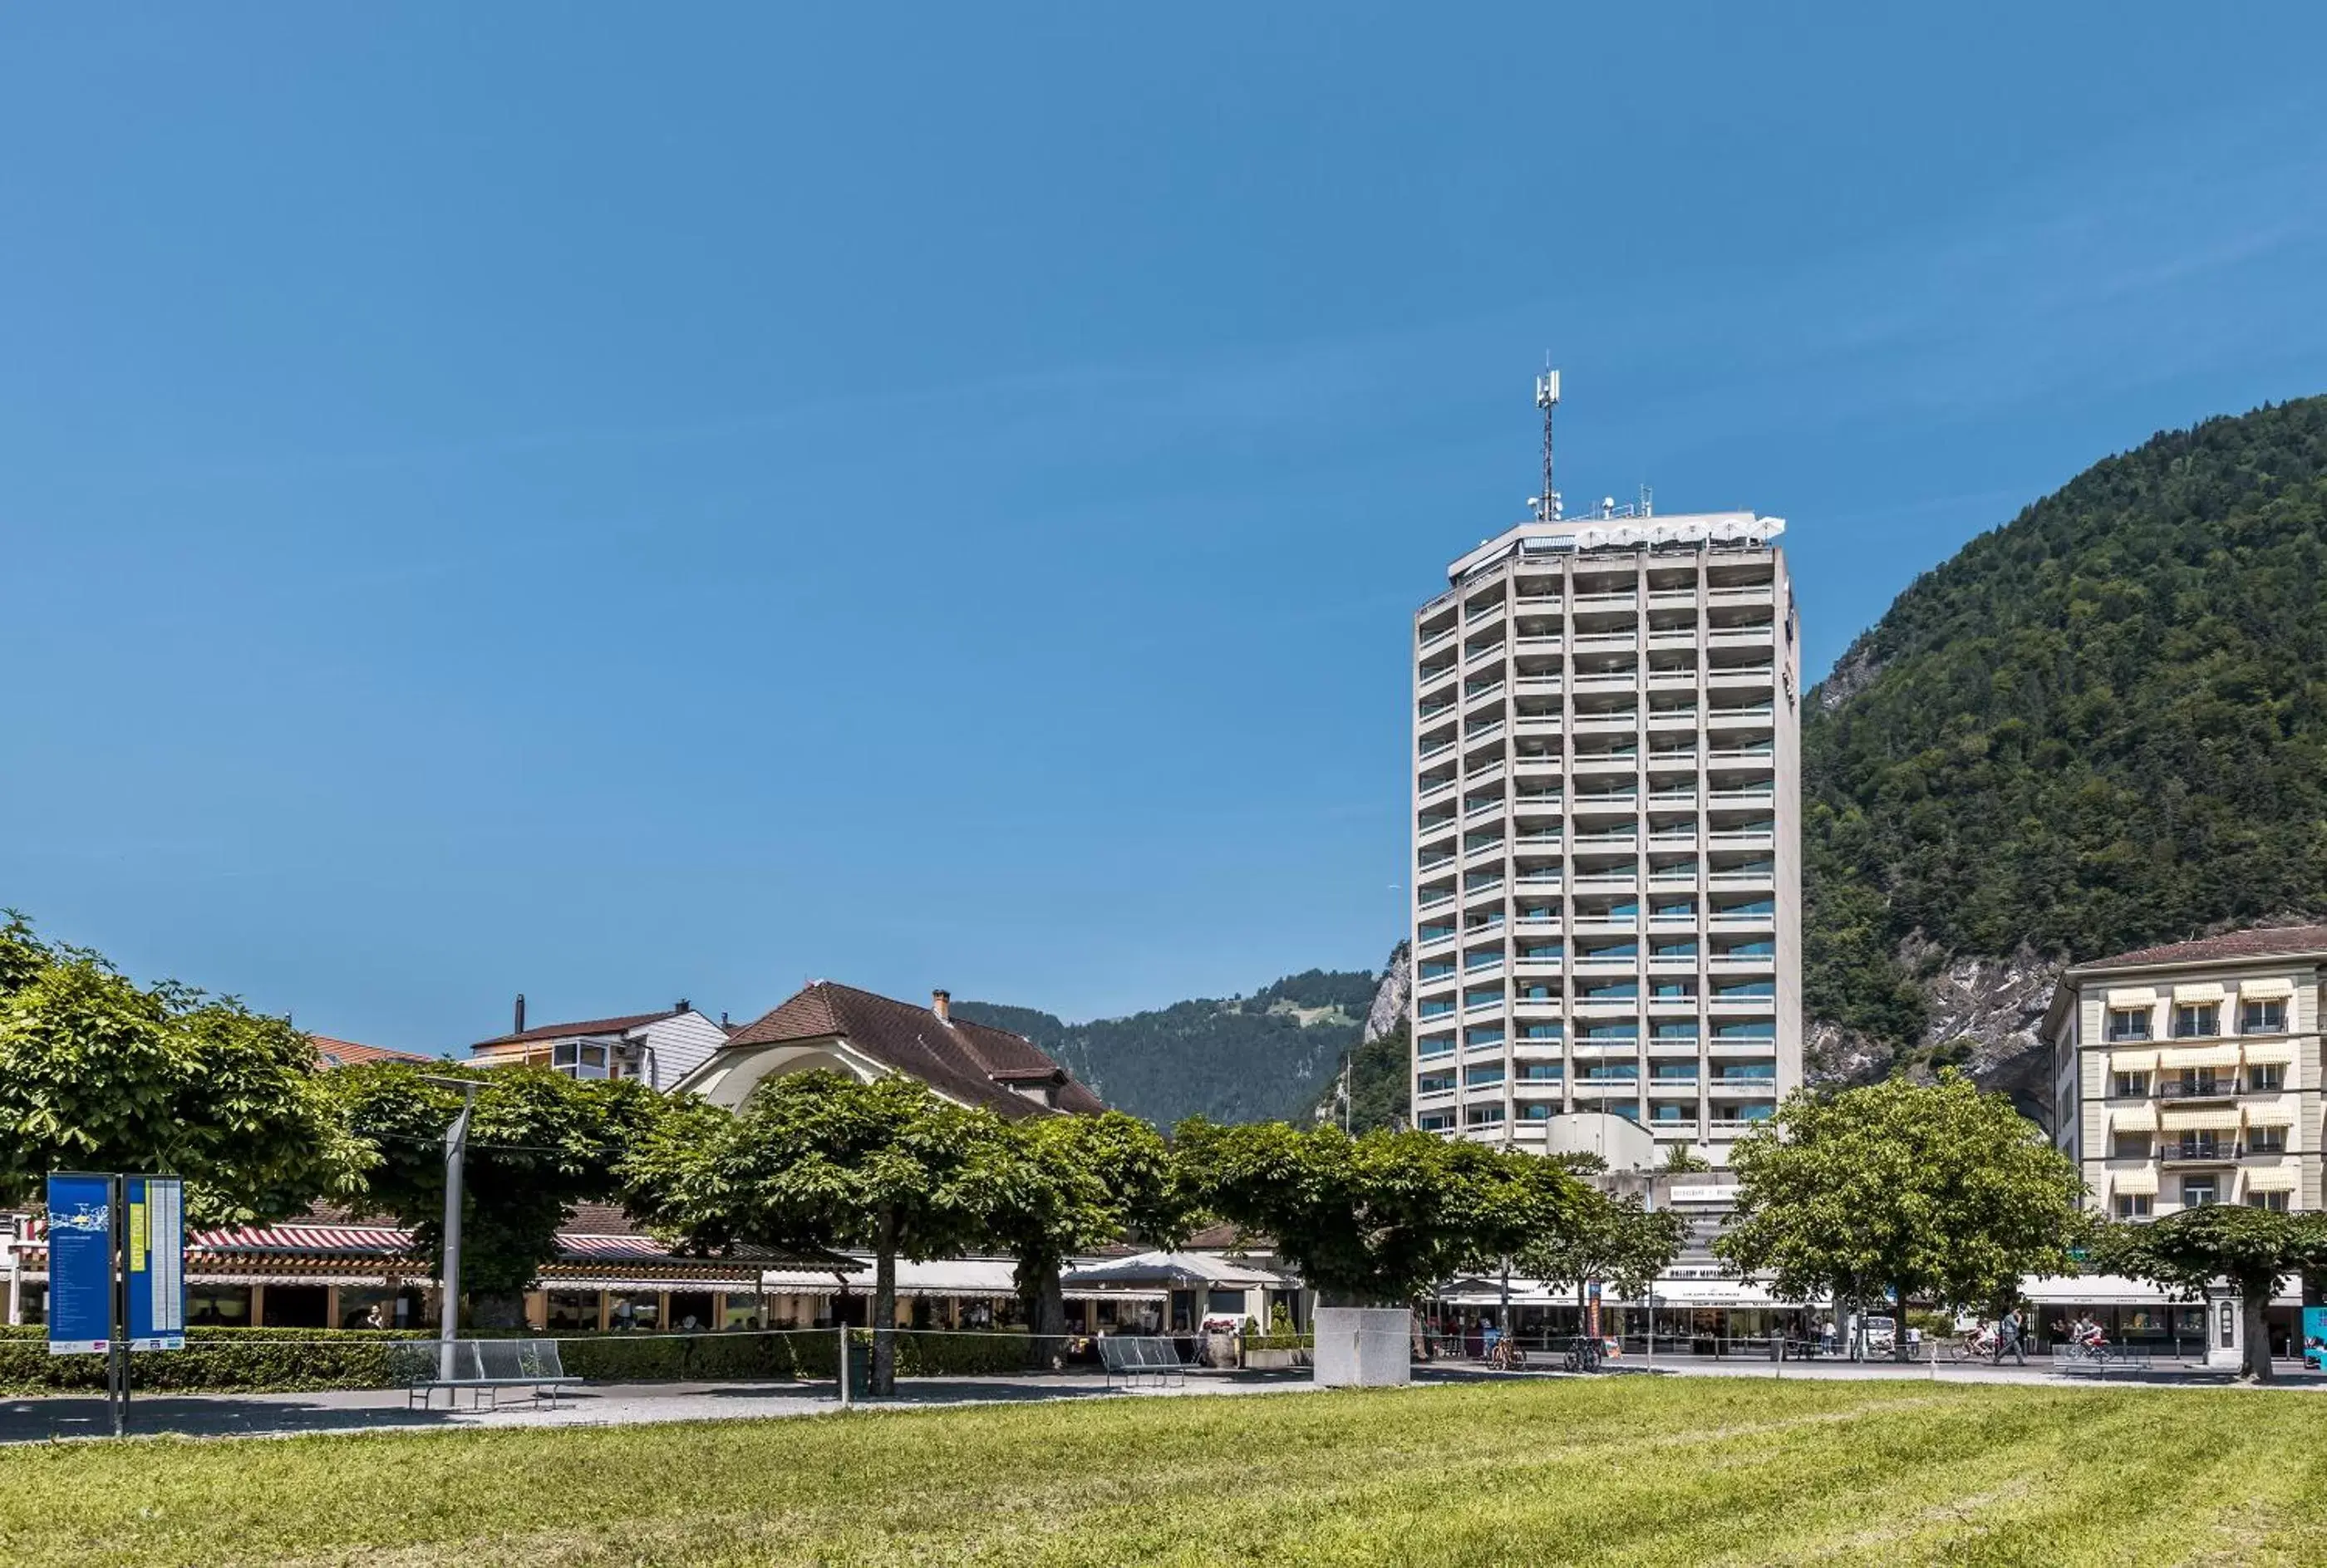 Property building in Metropole Swiss Quality Hotel